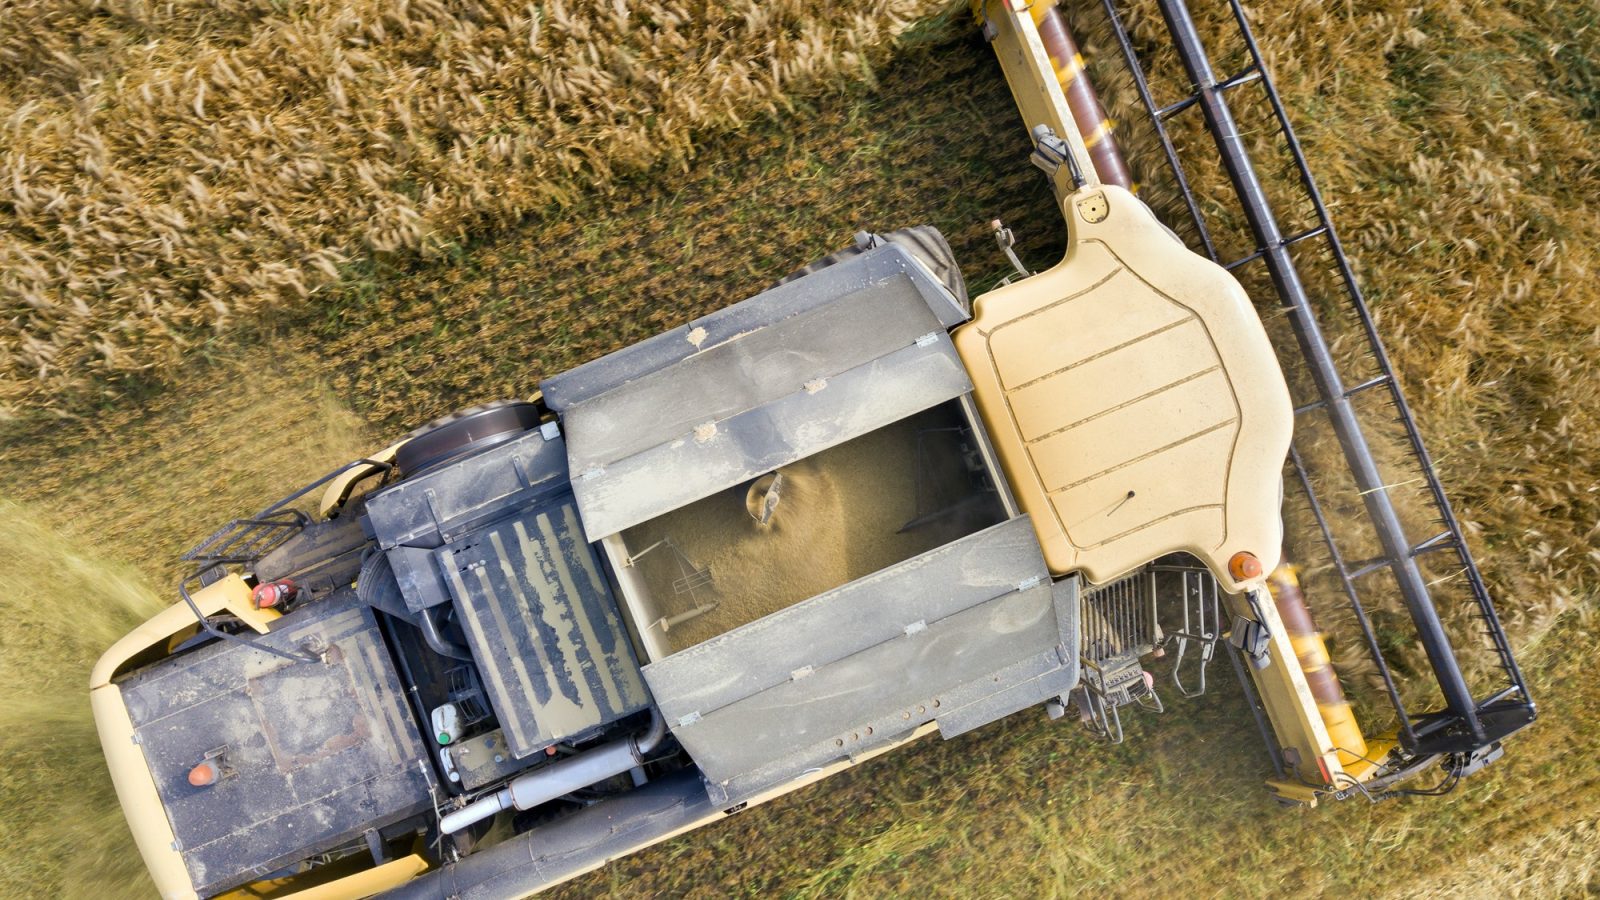 Aerial view of combine harvester harvesting large ripe wheat field. Agriculture from drone view